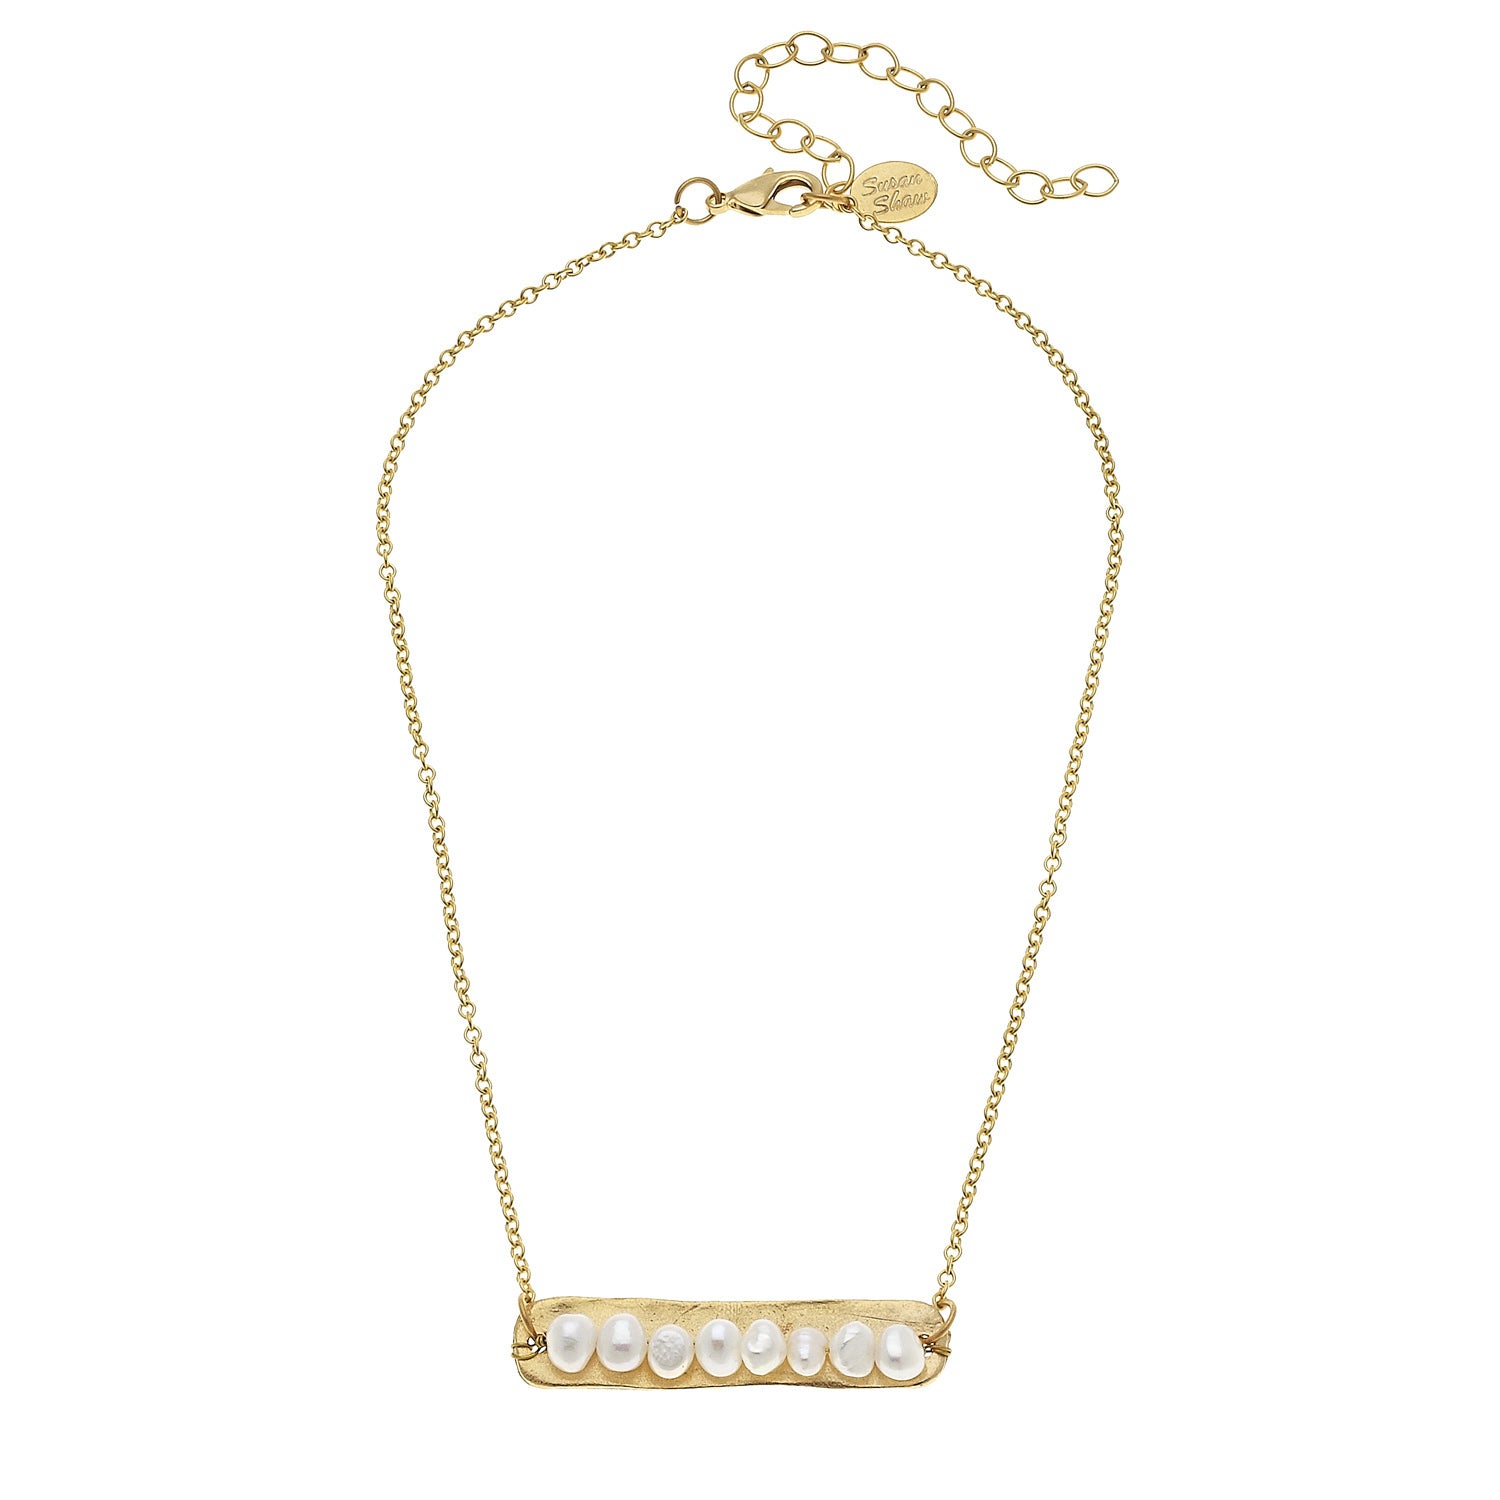 Susan Shaw Genuine Freshwater Pearls on Handcast Gold Bar Necklace